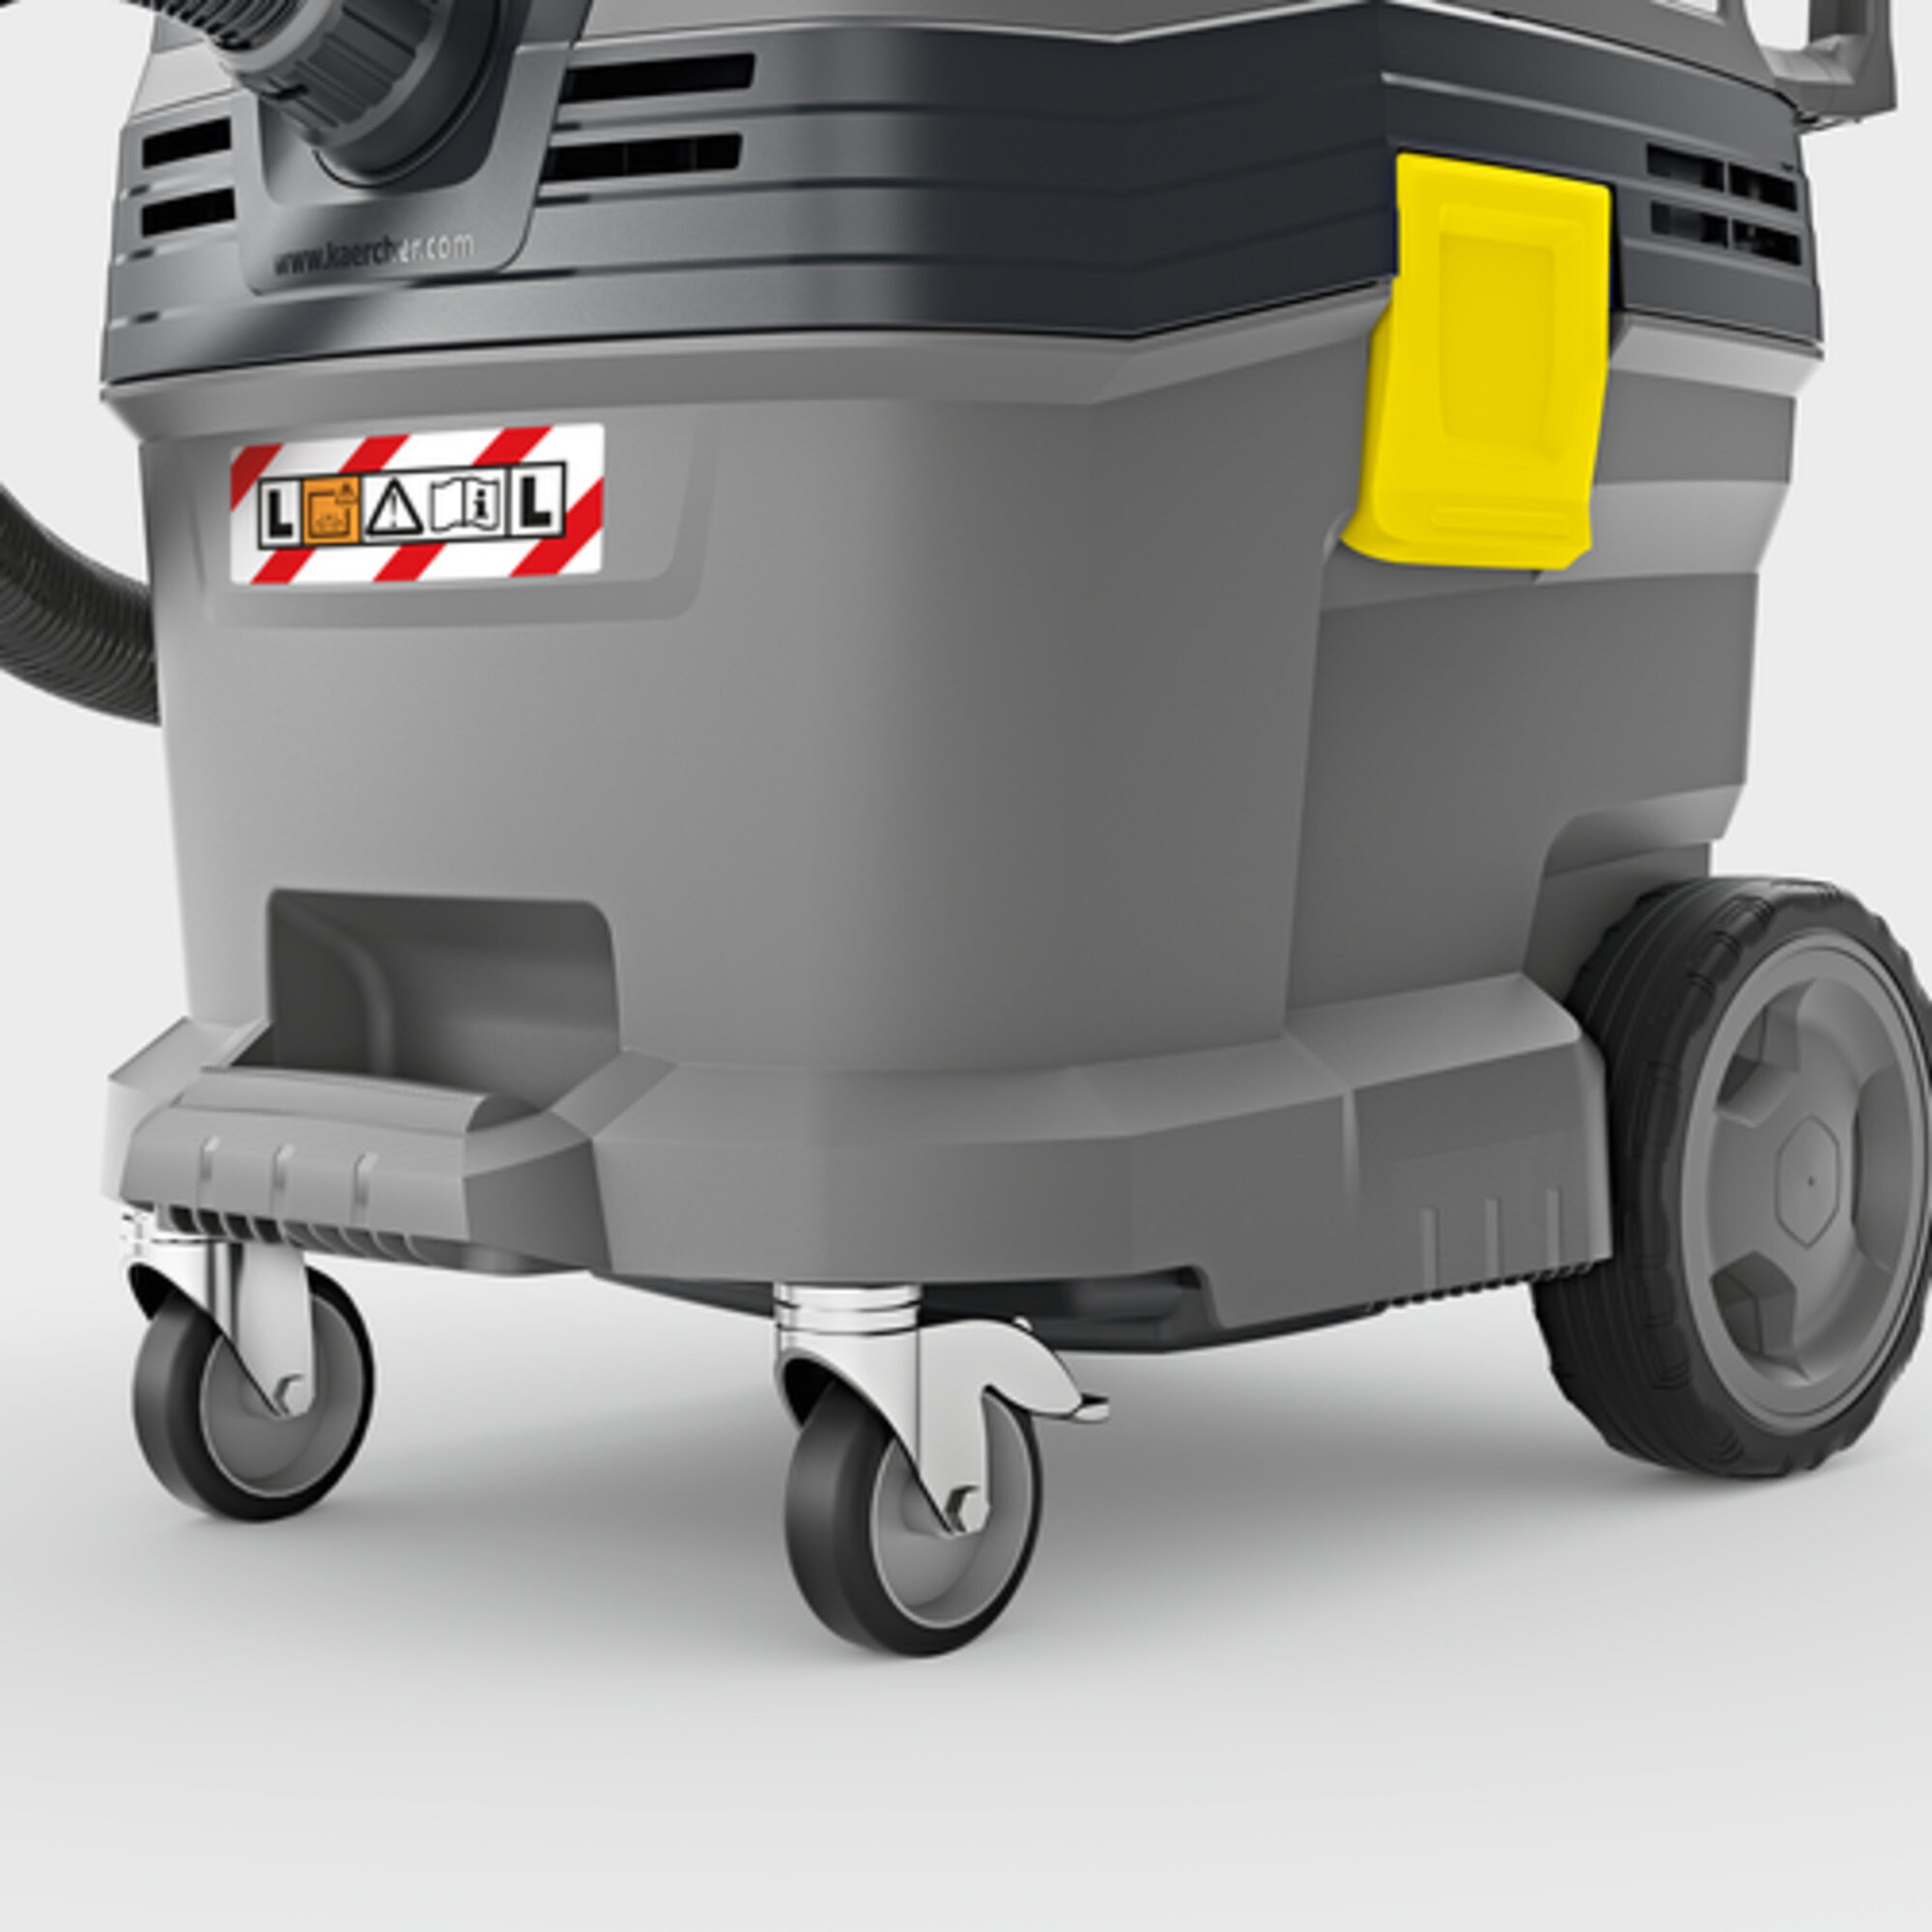 Wet and dry vacuum cleaner NT 30/1 Tact L: Rugged container with bumpers and metal castors.